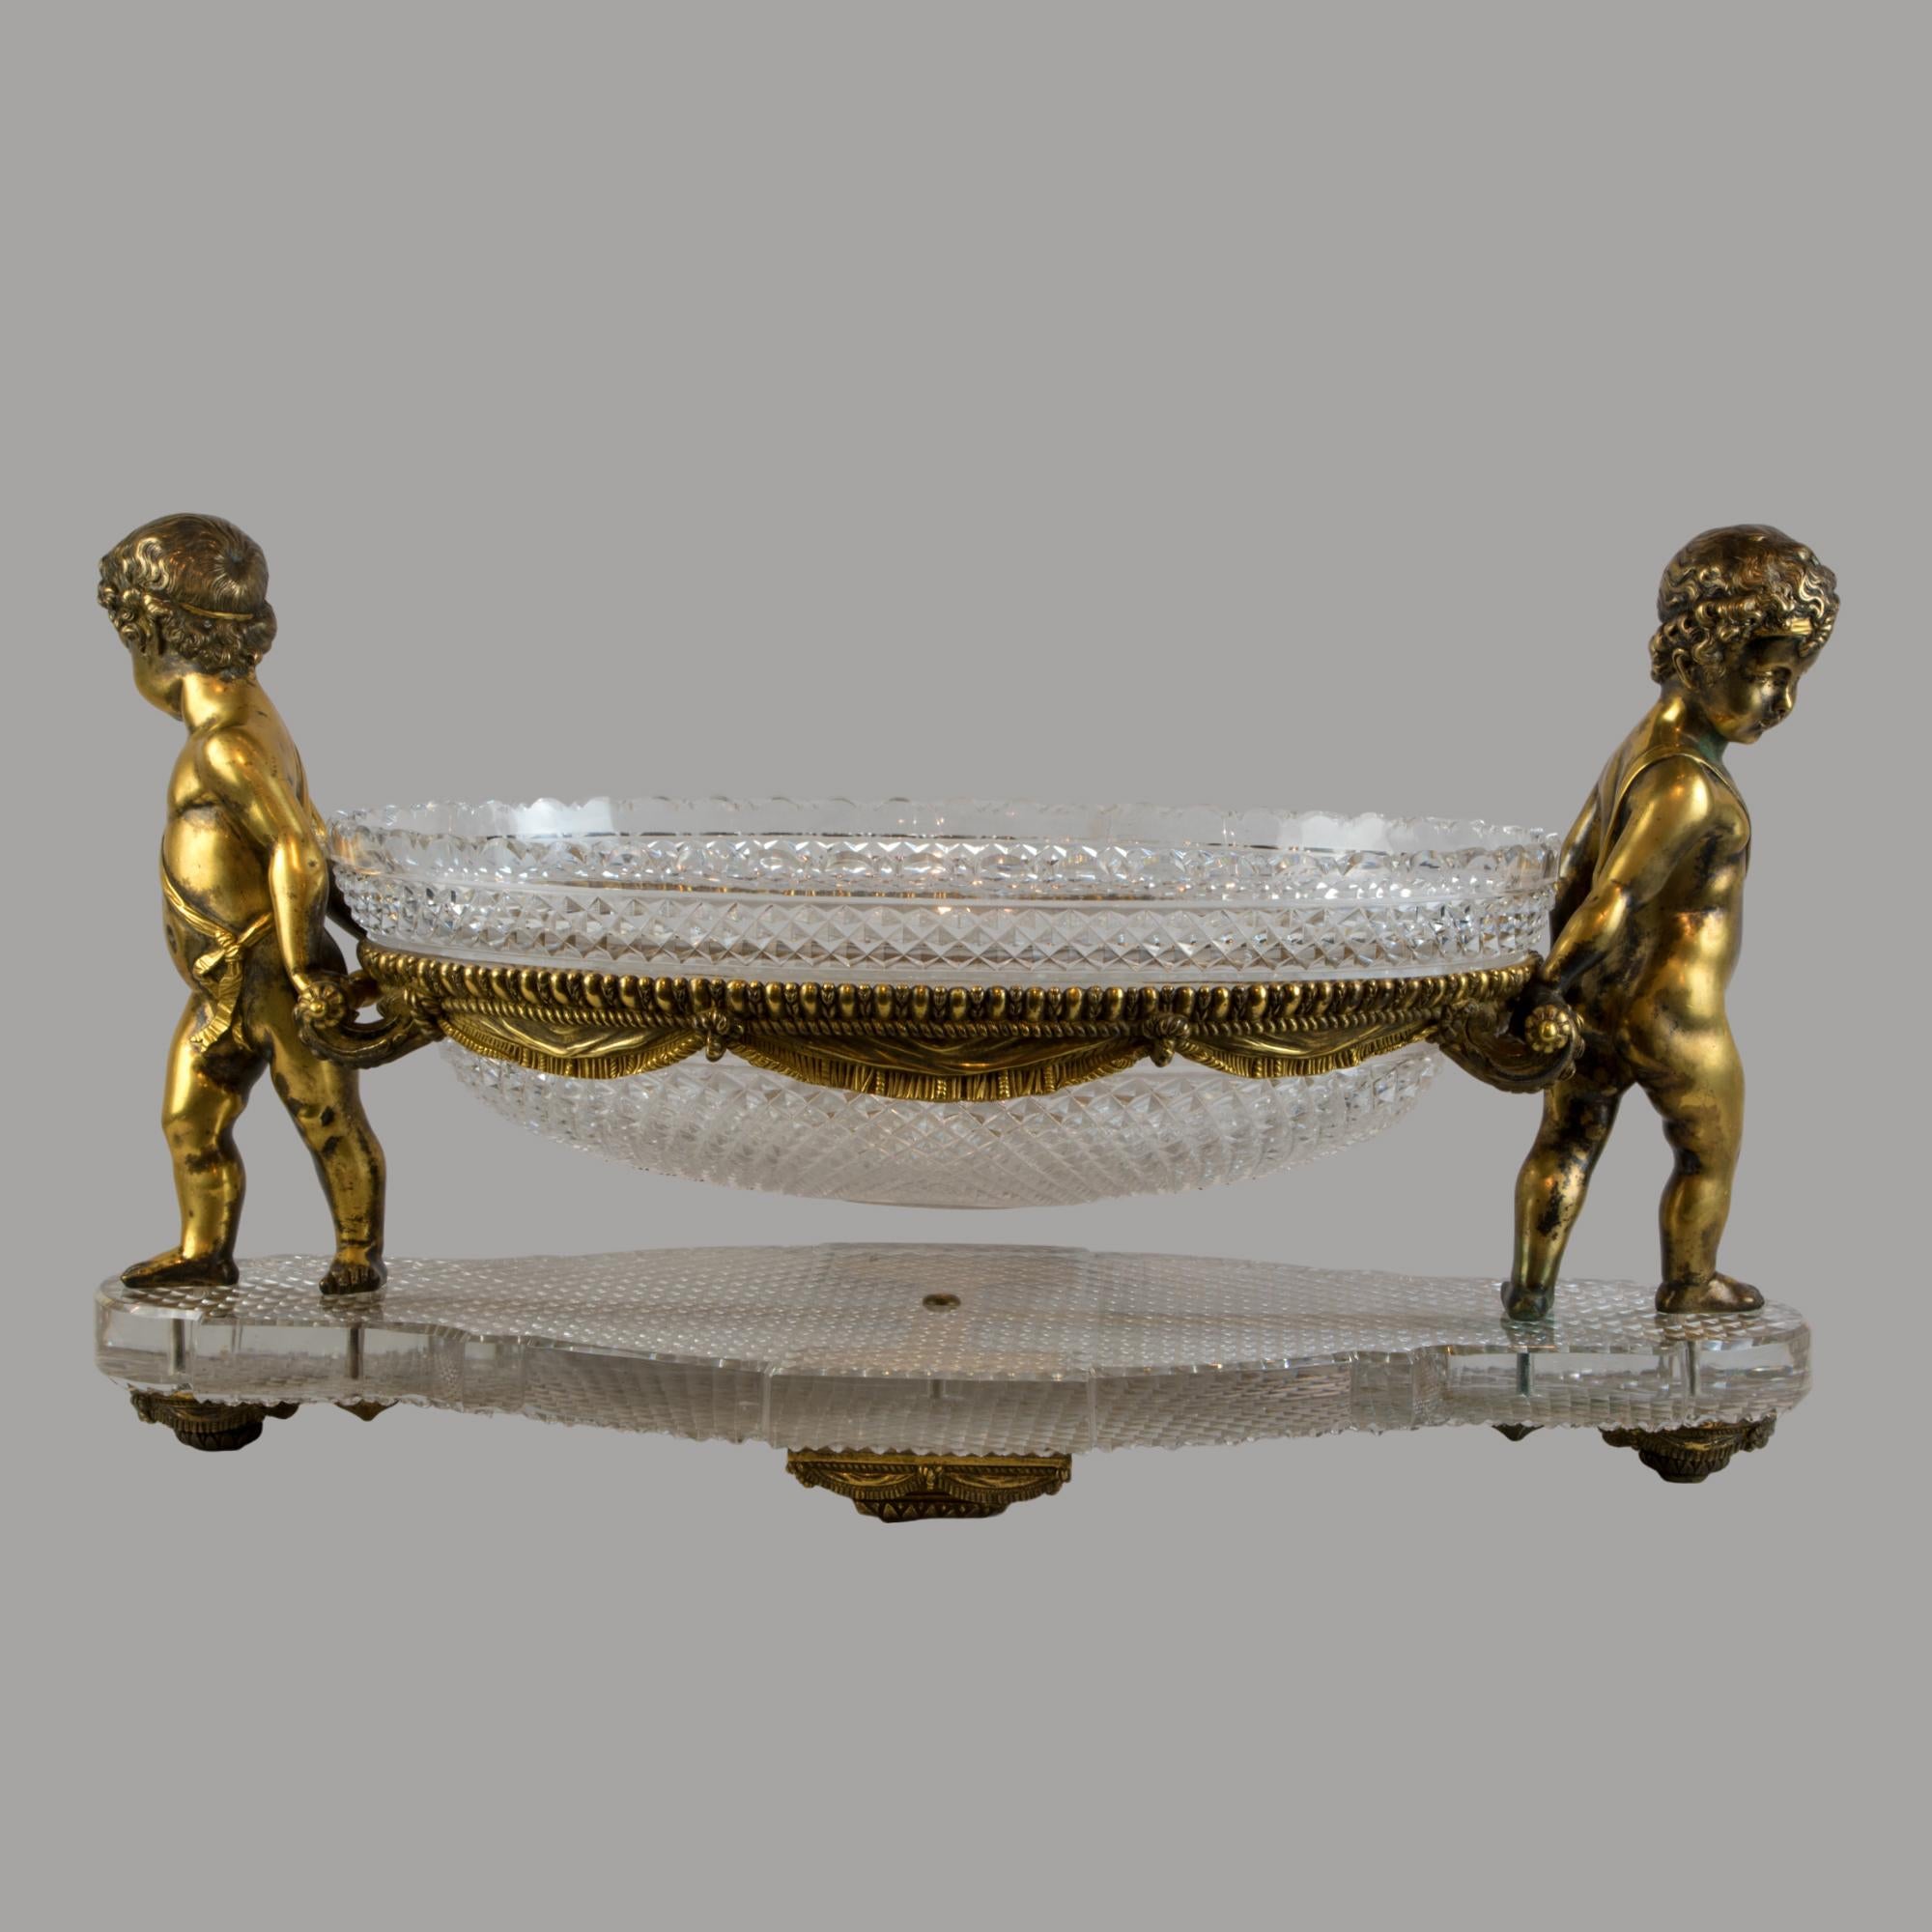 French Louis XVI Style Gilt-Bronze and Cut Glass Figural Centerpiece att. to Baccarat For Sale